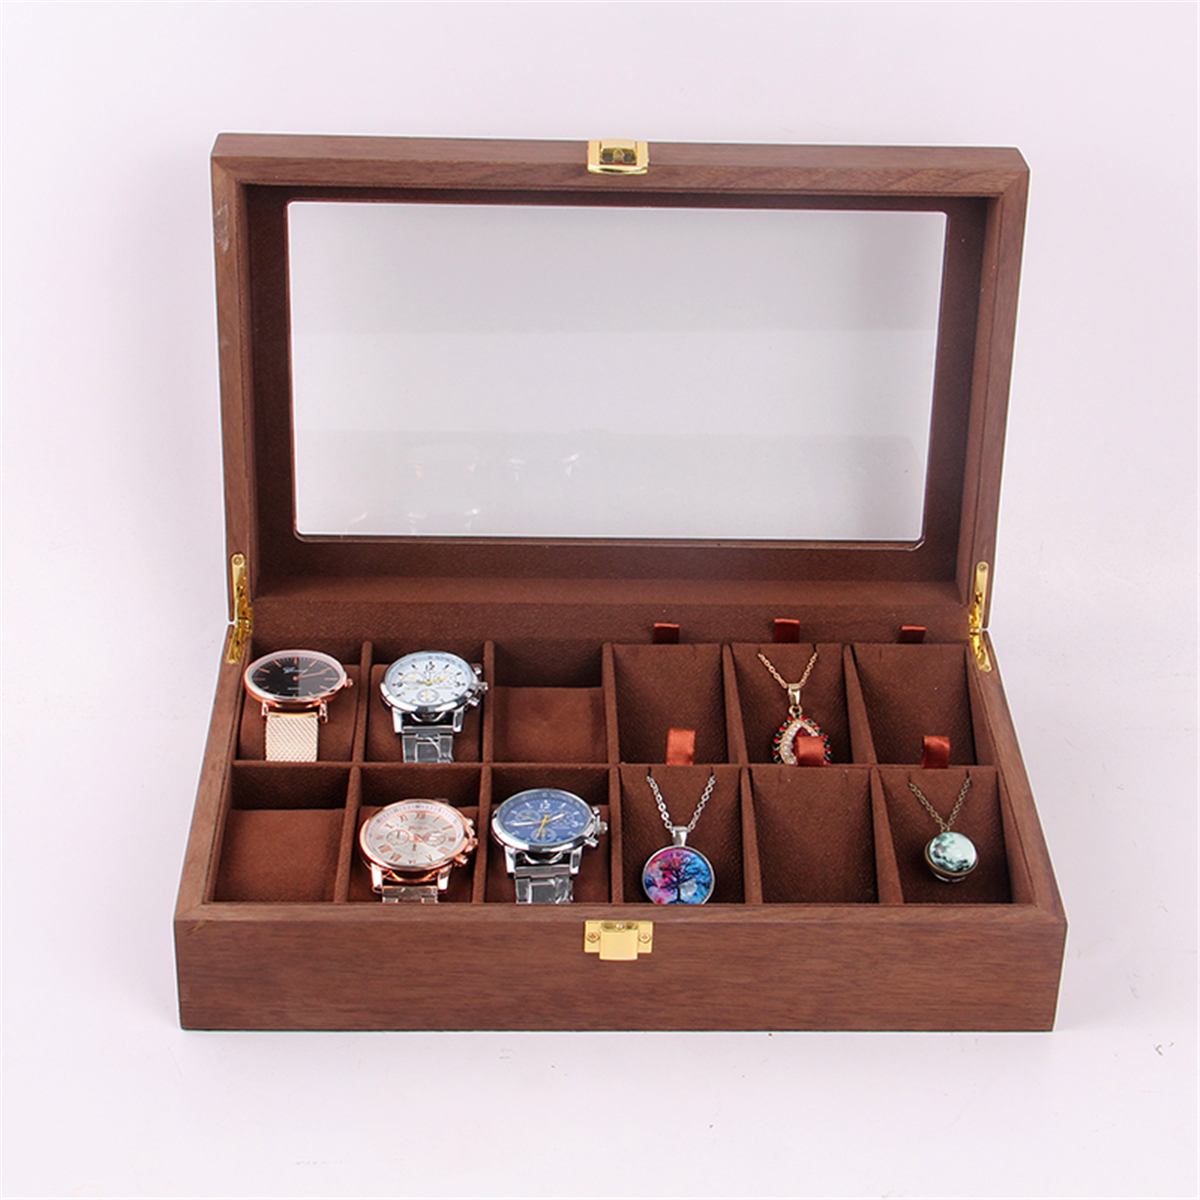 Woden-Watch-Boxes-Necklace-Jewelry-Watch-Display-Box-1658187-9